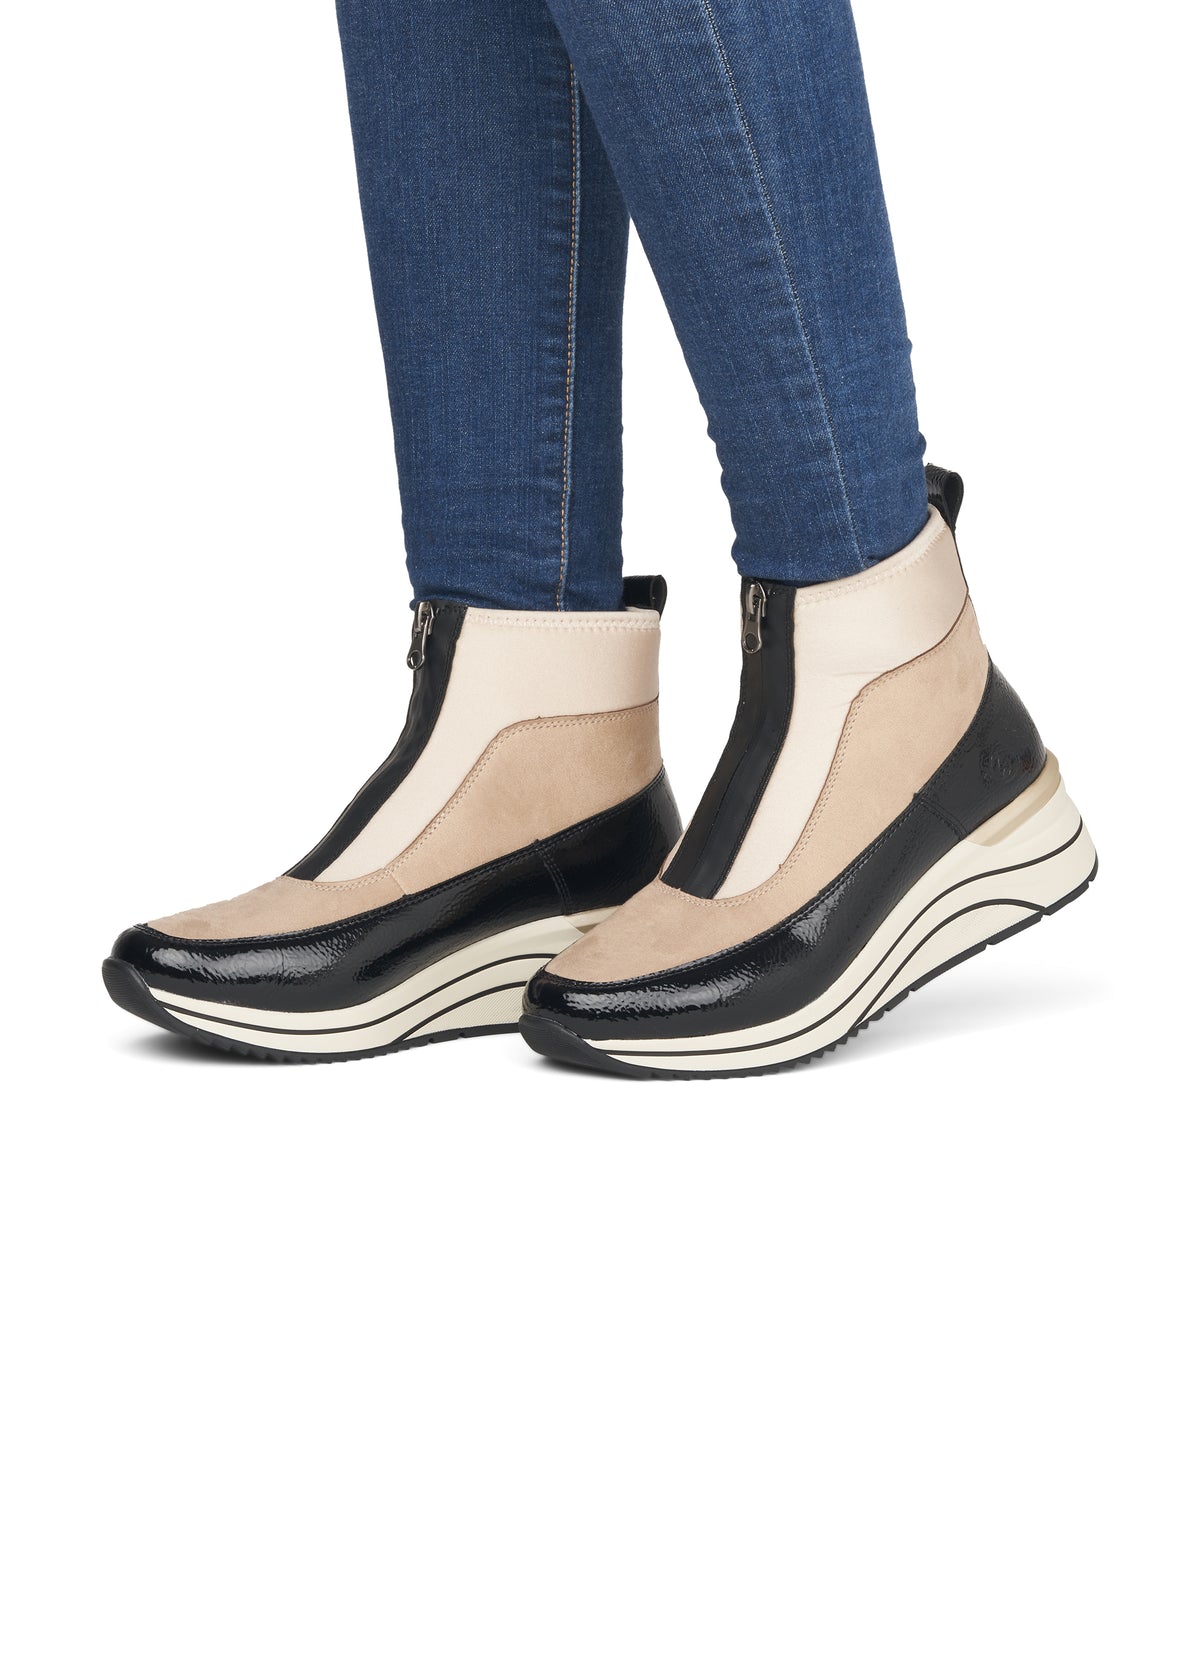 Ankle boots with a wedge heel - beige-black